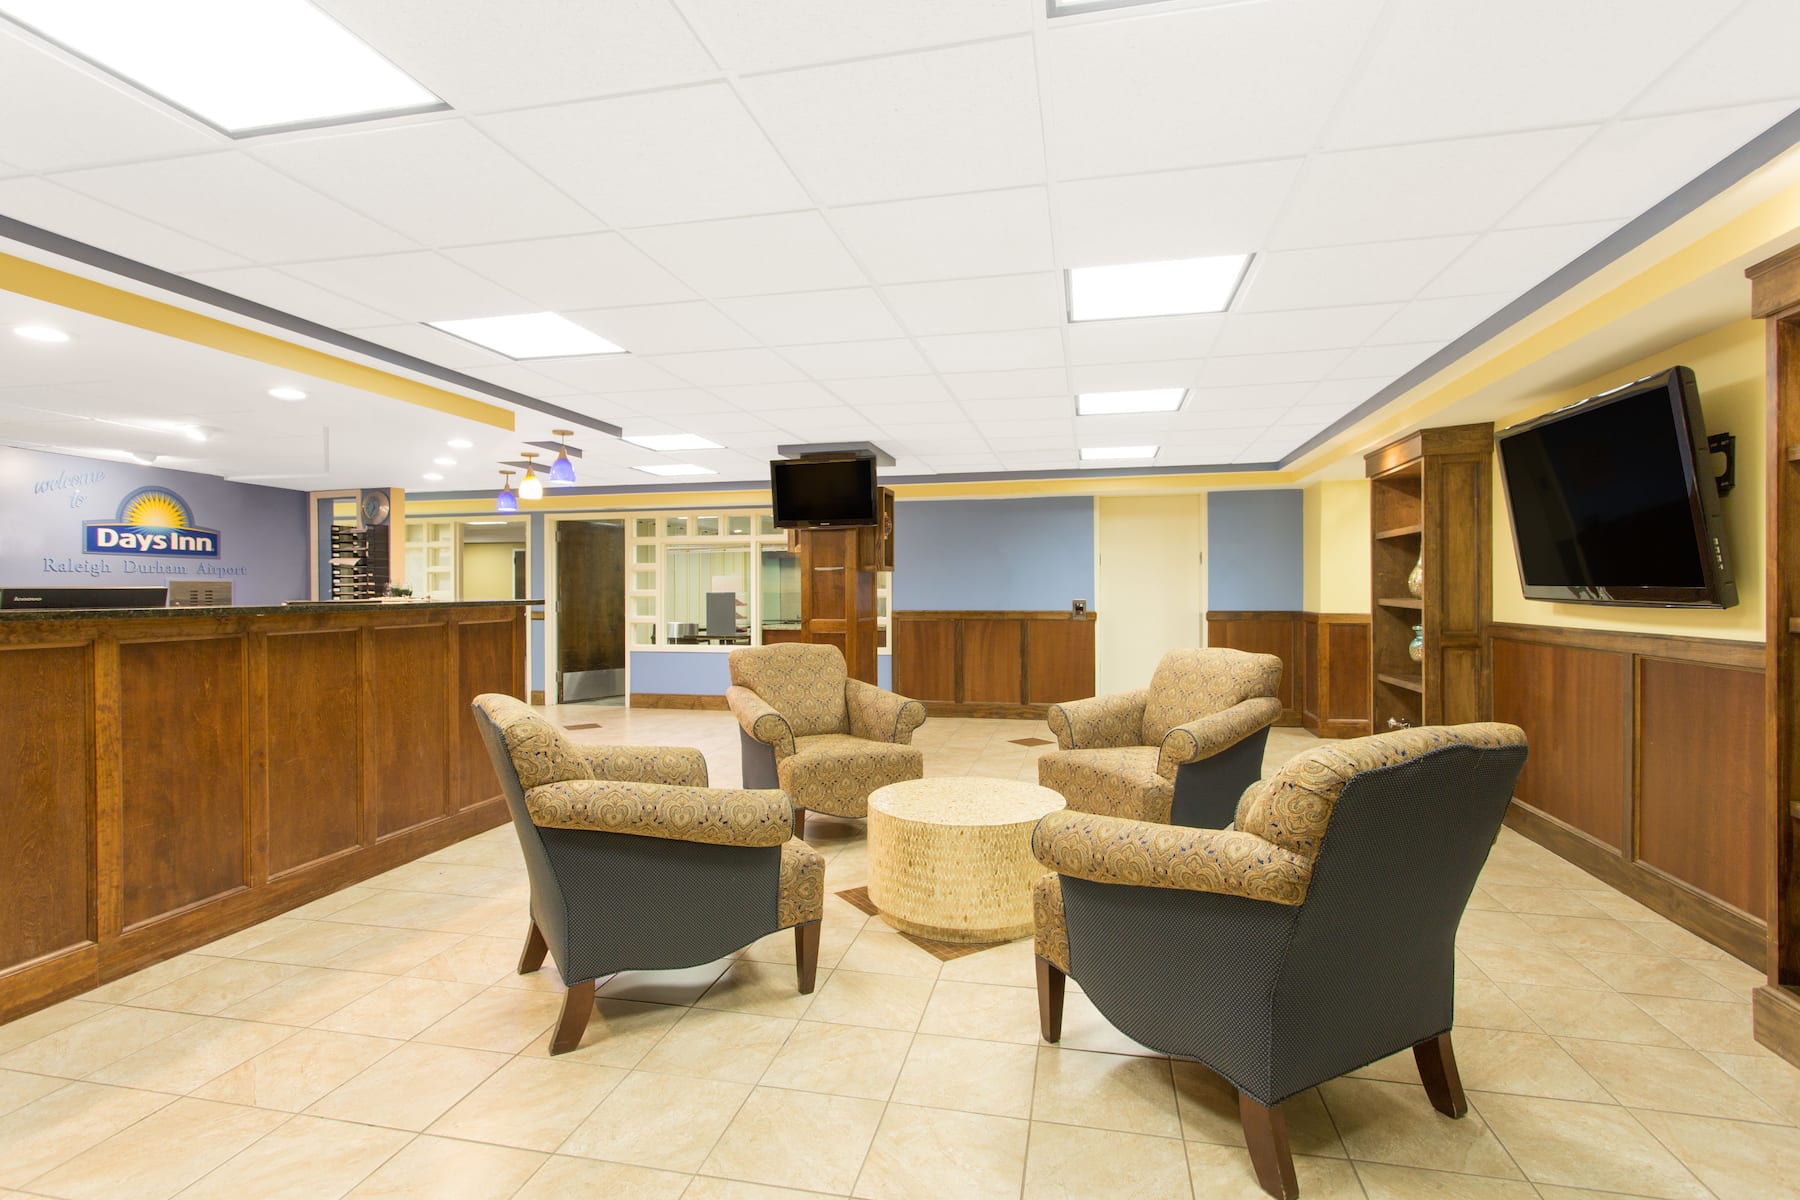 Days Inn by Wyndham Raleigh-Airport-Research Triangle Park Morrisville, NC Hotel